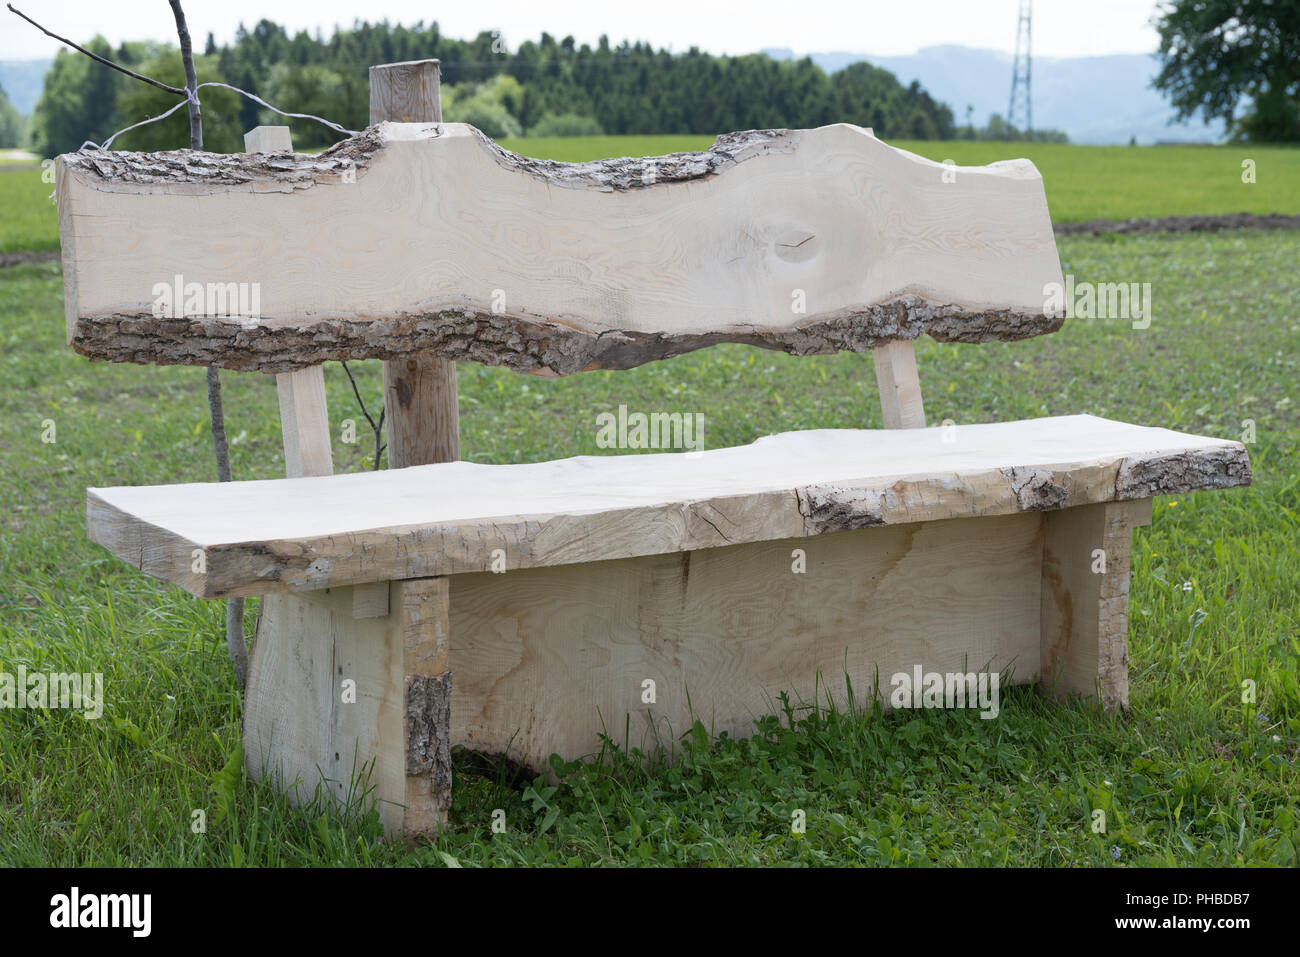 Rustic garden bench made of solid hardwood Stock Photo